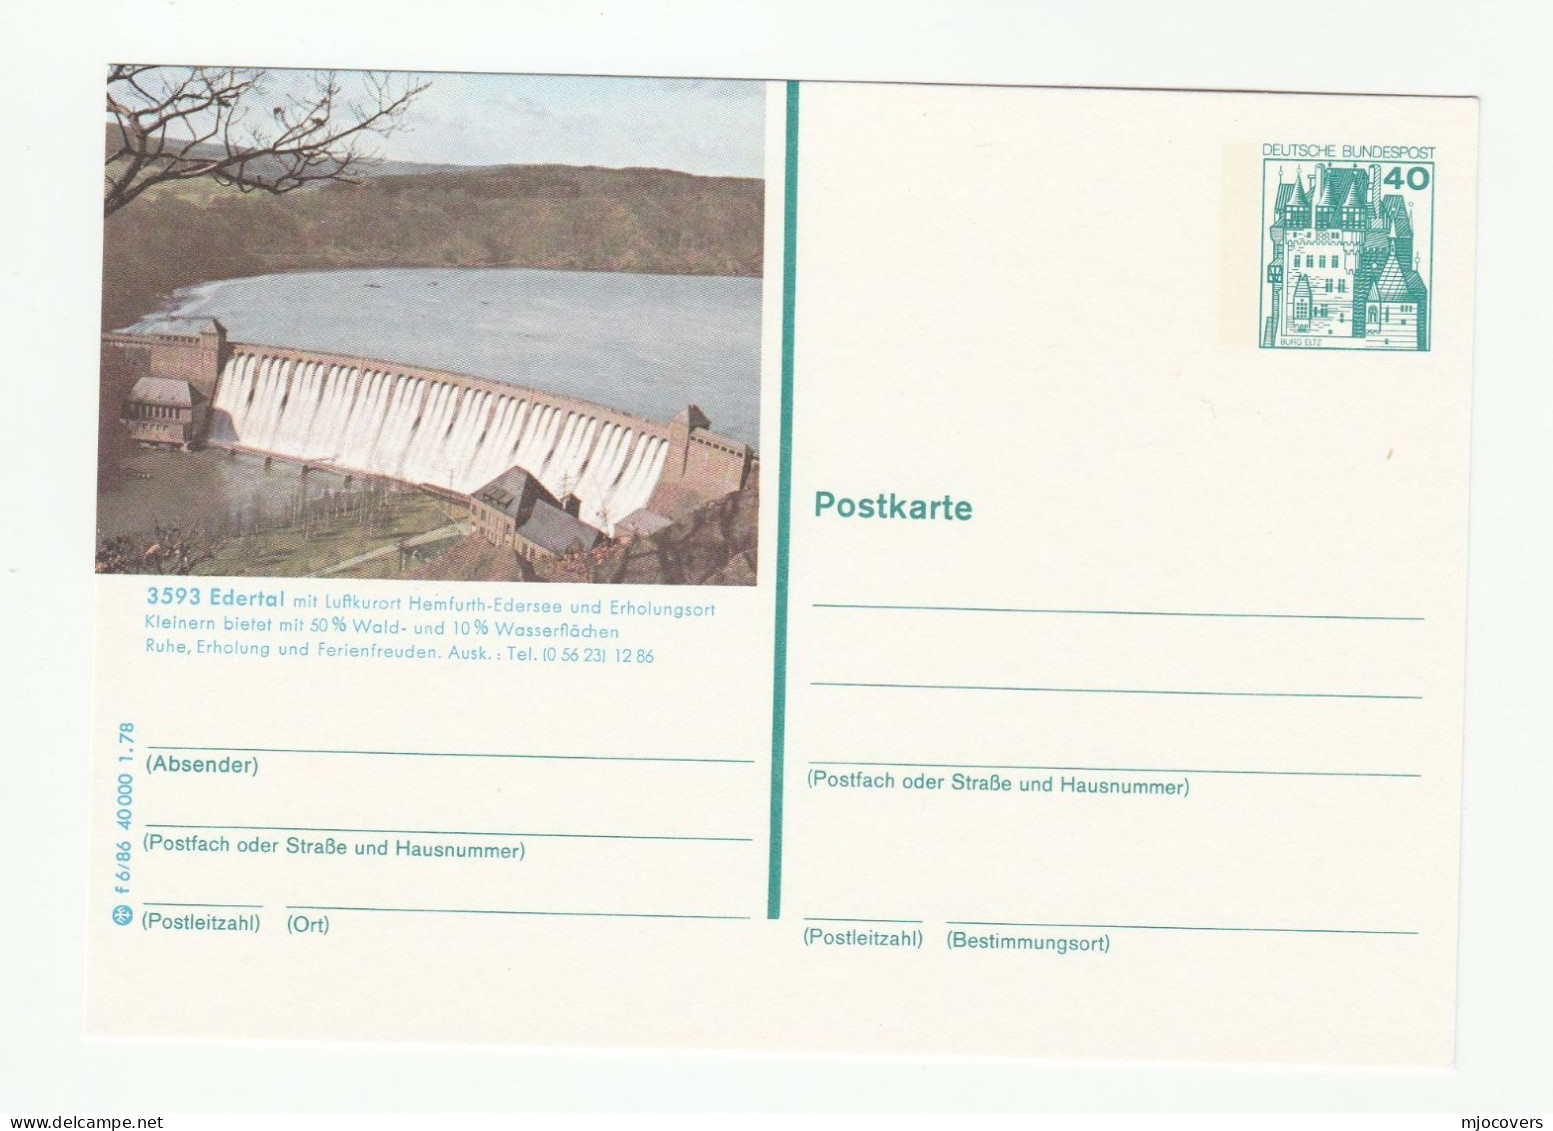 Edertal HYDROELECTRIC DAM Postal STATIONERY Card  1978 Germany Cover Electricity Energy Hydro Water - Wasser